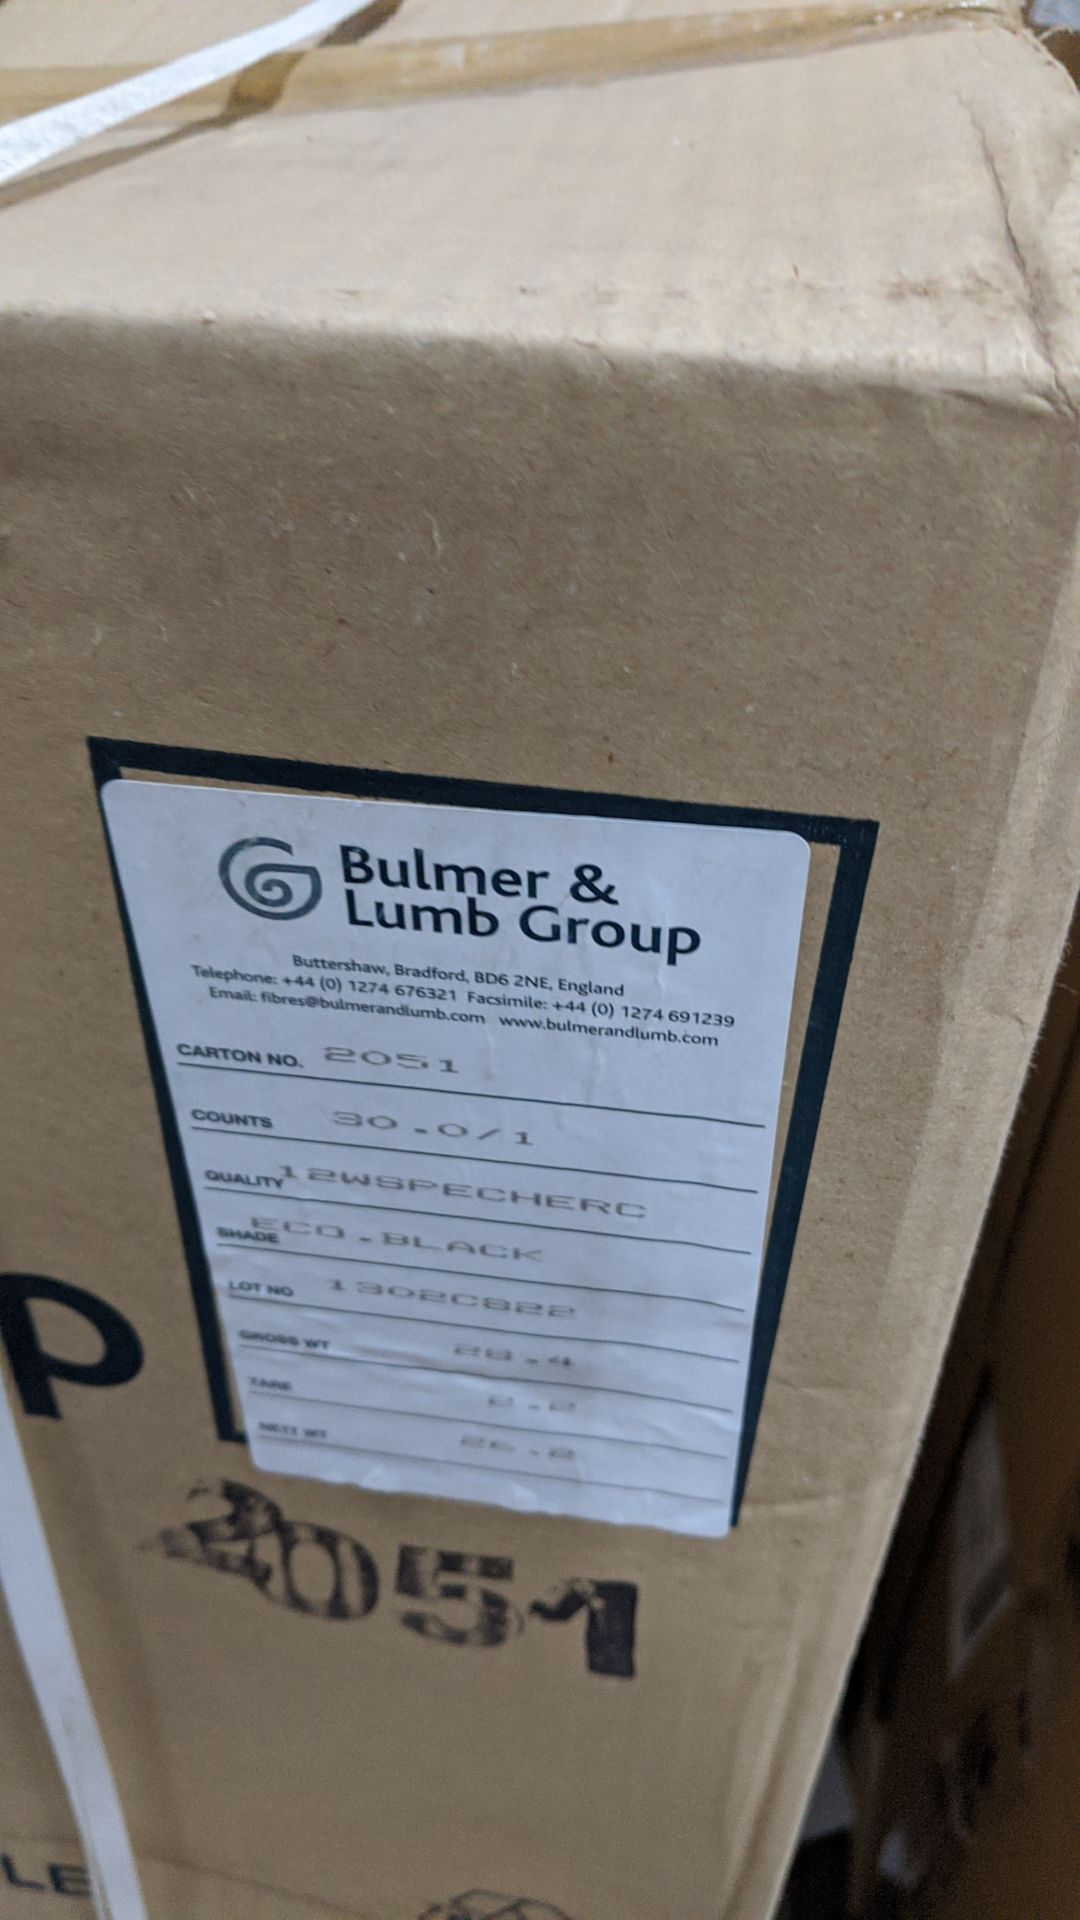 9 boxes of Bulmer & Lumb Group yarn, colour Eco.Black - see photos of labels on boxes for full - Image 4 of 9